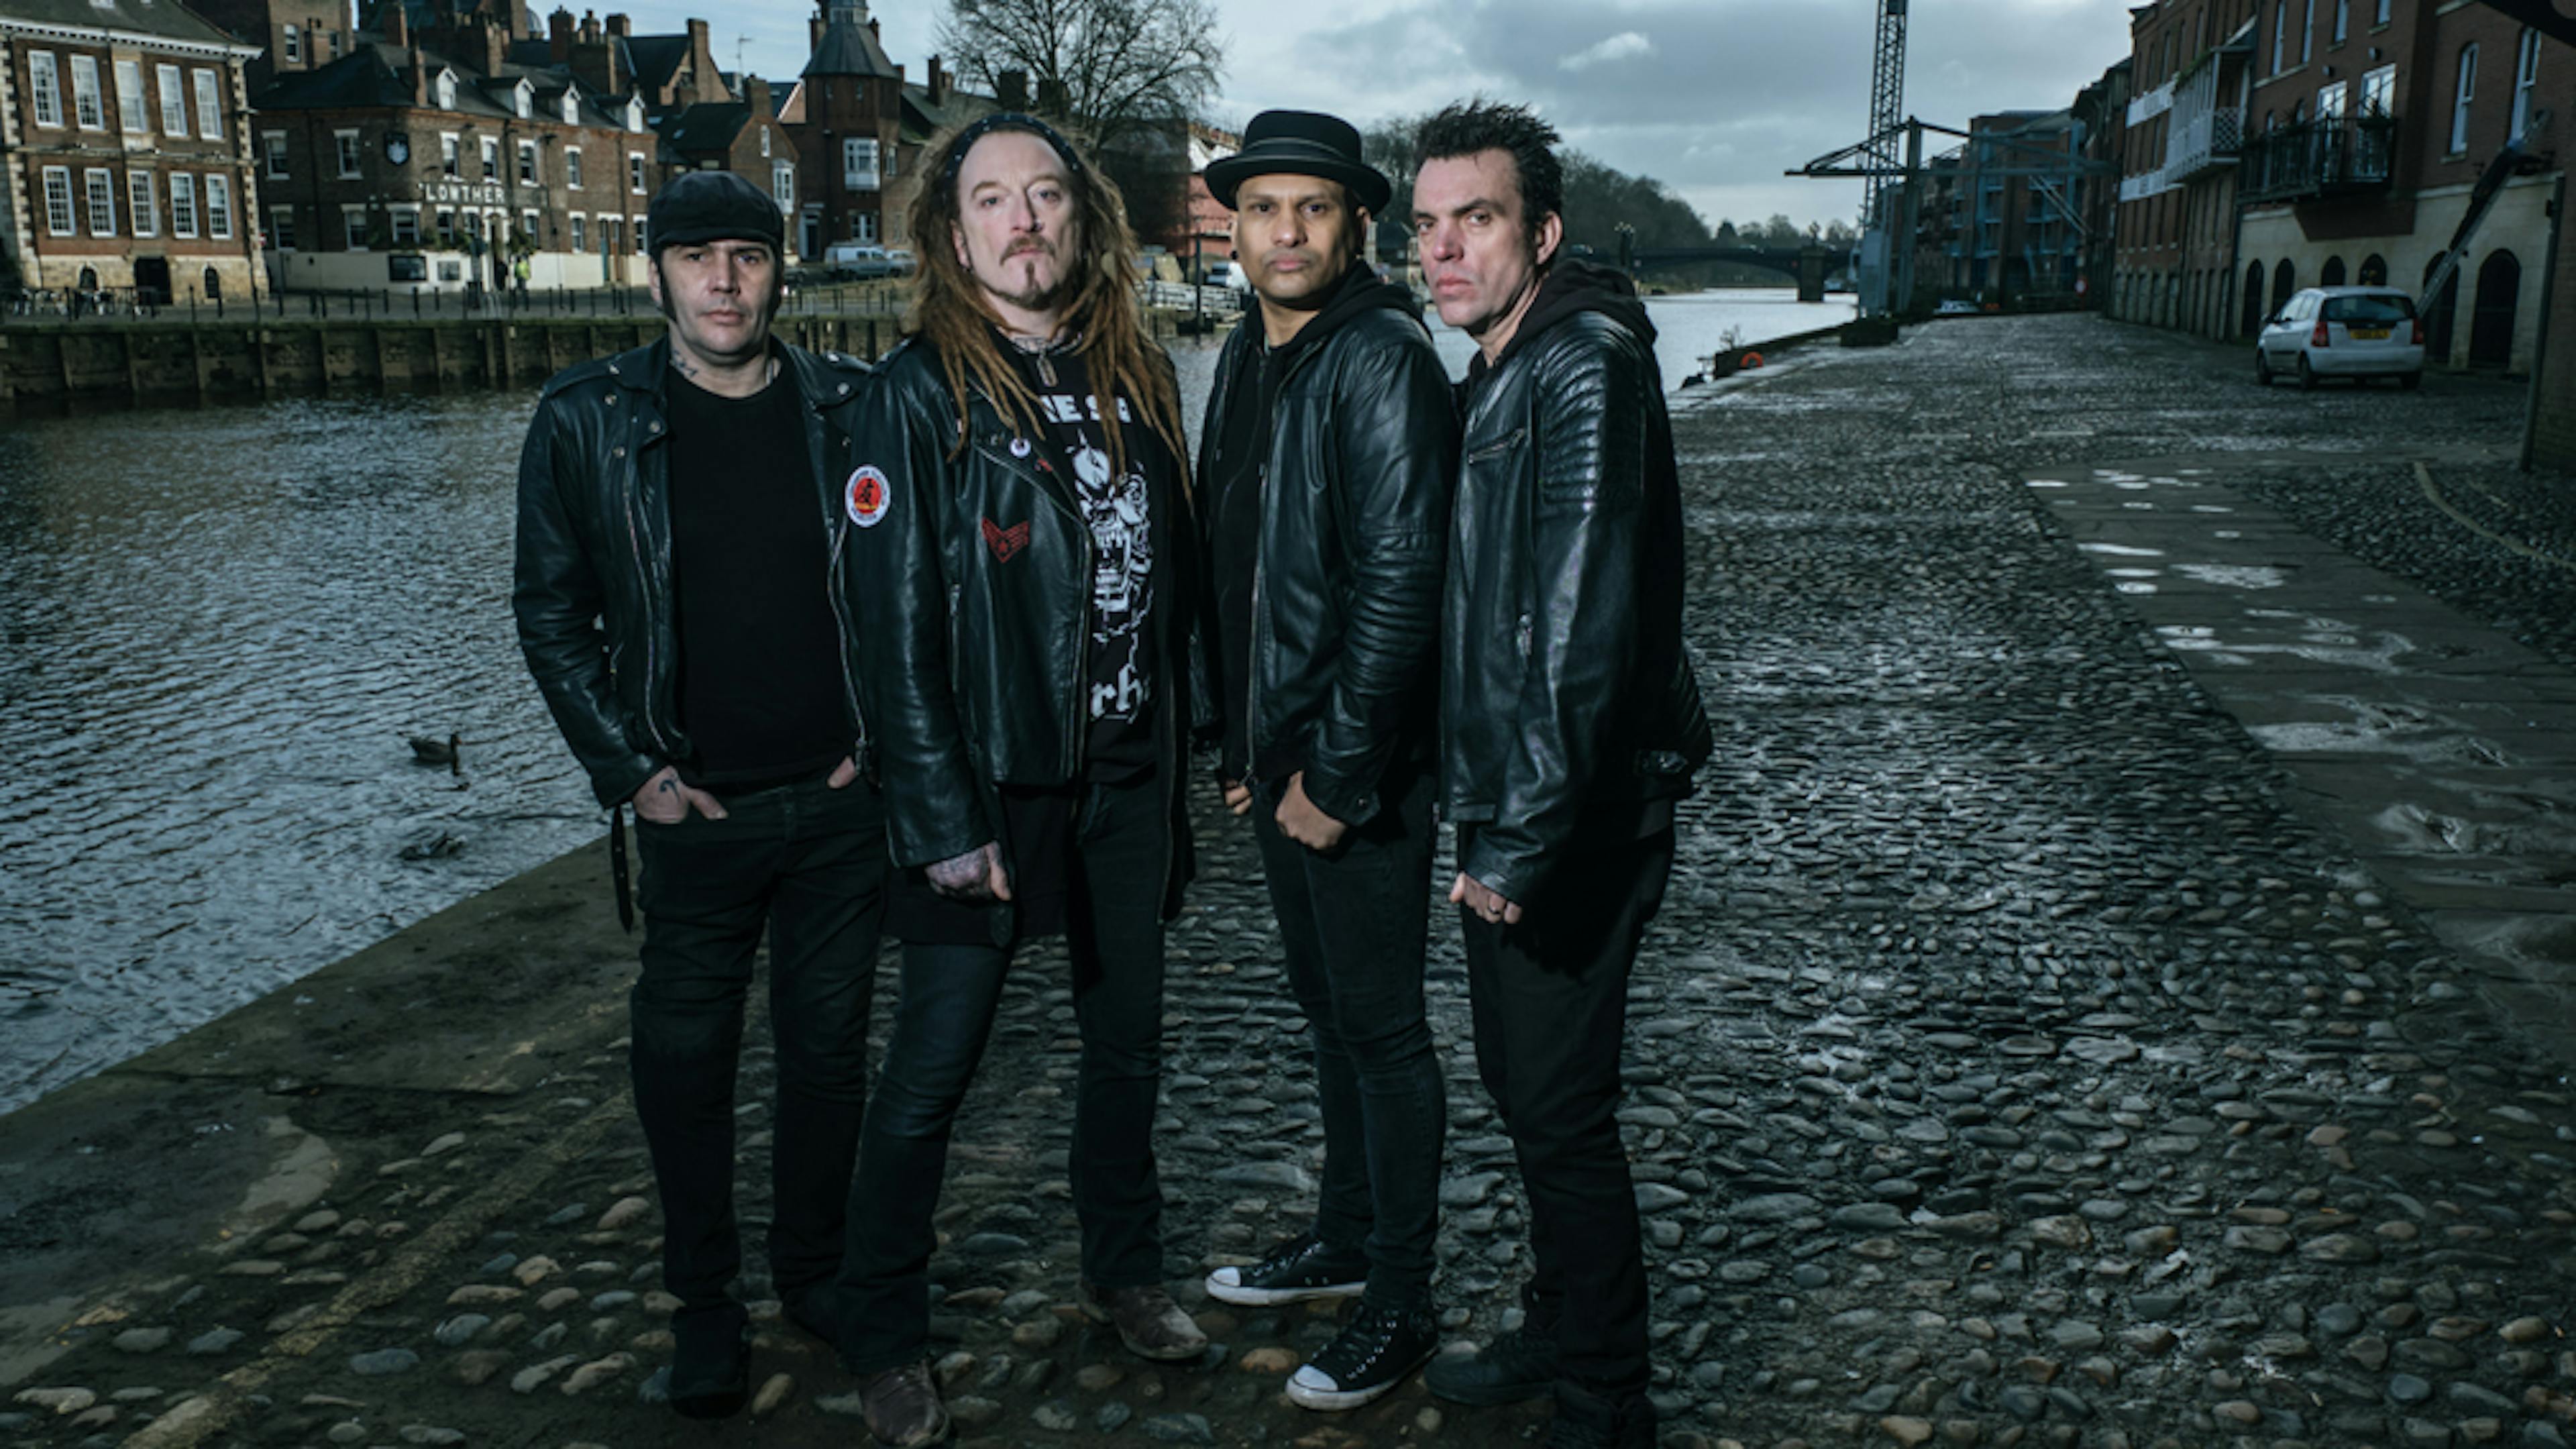 The Wildhearts Announce First New Album In 10 Years